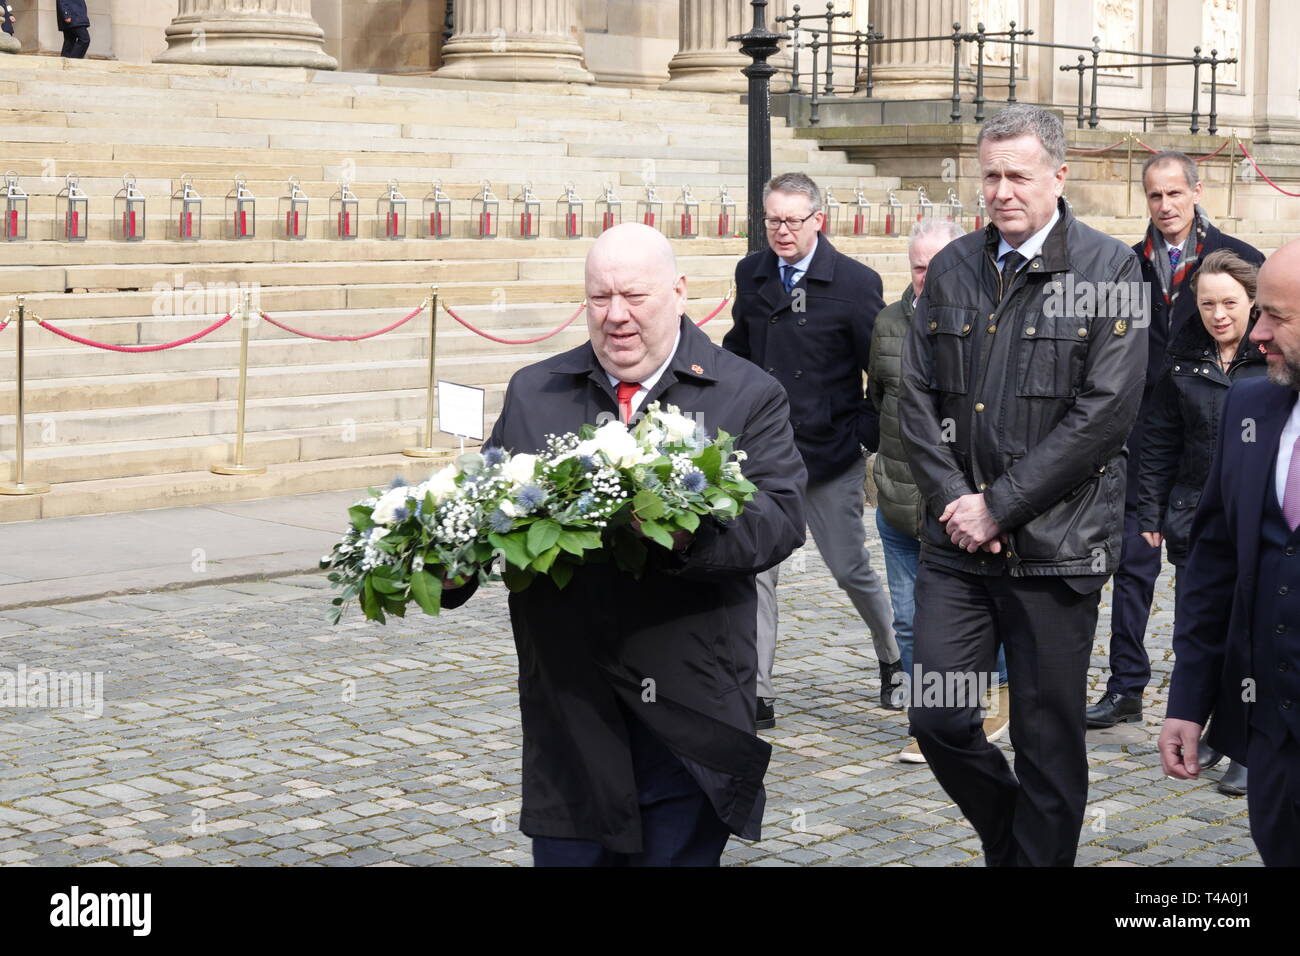 Liverpool, UK. 15th Apr, 2019. Mayor Joe Anderson lays a wreath at the memorial service at St George's Hall to mark the 30th anniversary of the Hillsborough disaster in which 96 Liverpool supporters lost their lives. Credit: ken biggs/Alamy Live News Stock Photo